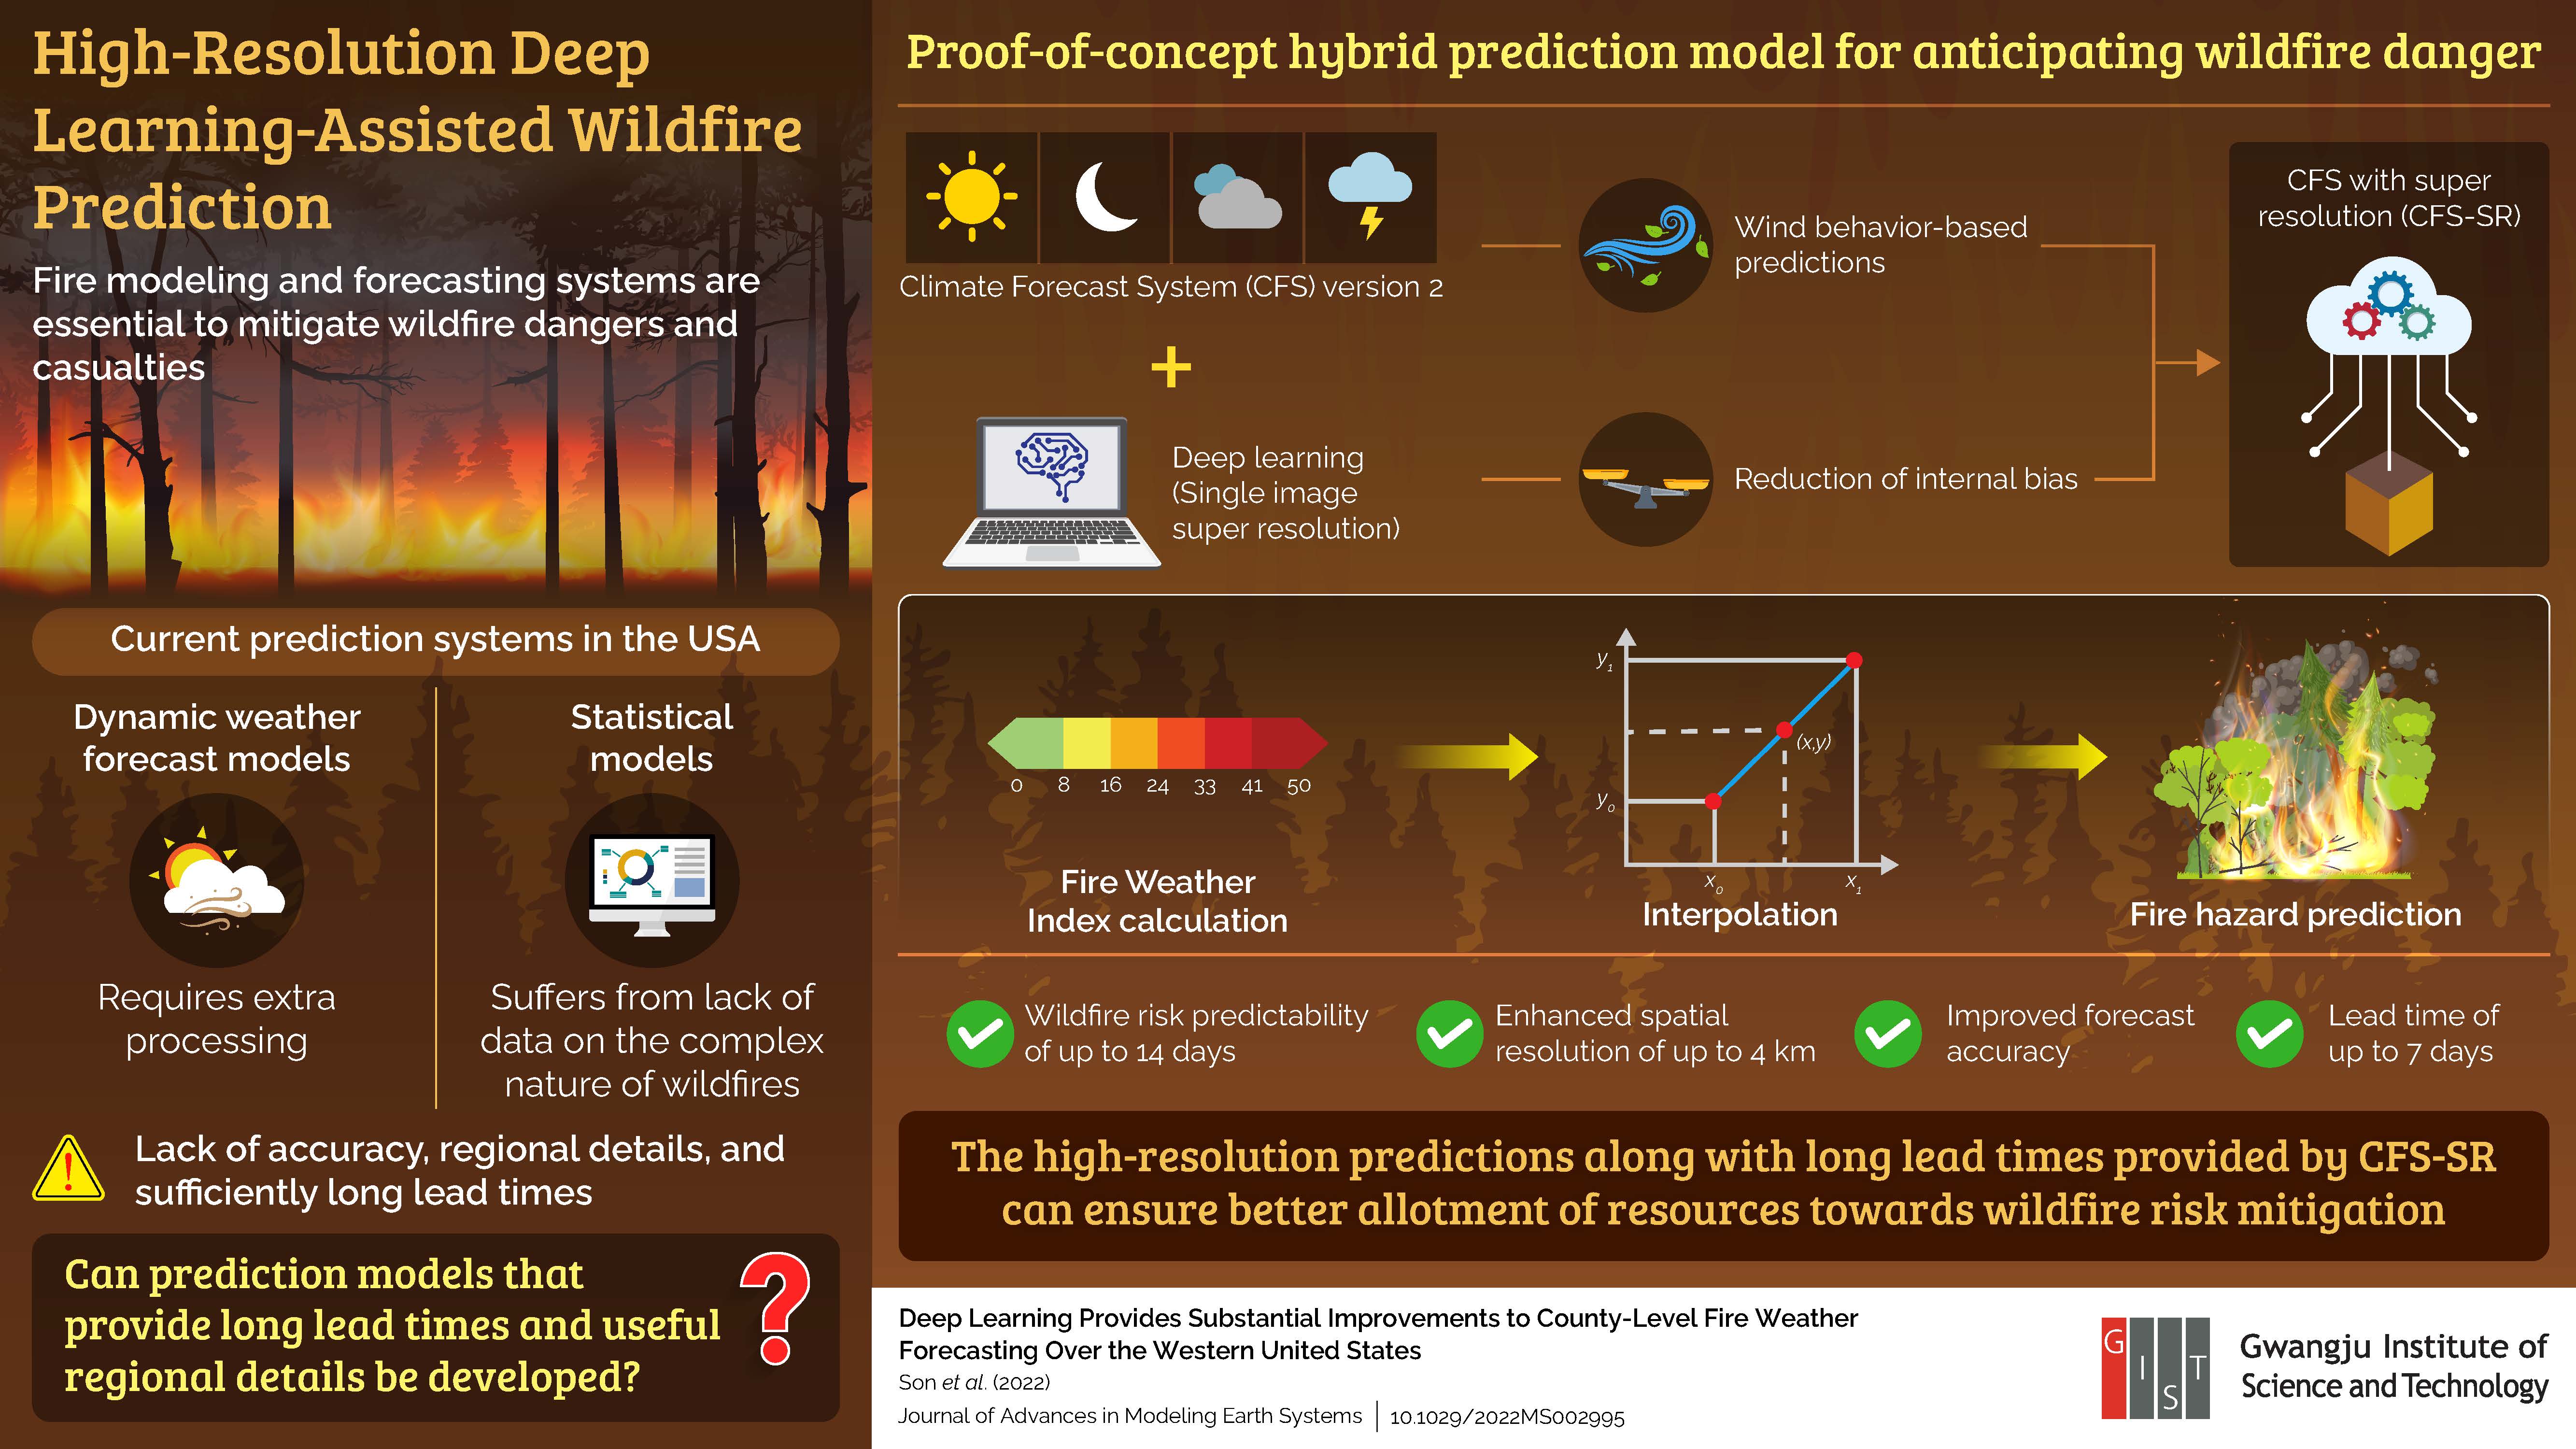 Gwangju Institute of Science and Technology Researchers Design AI-based Model that Predicts Extreme Wildfire Danger 이미지